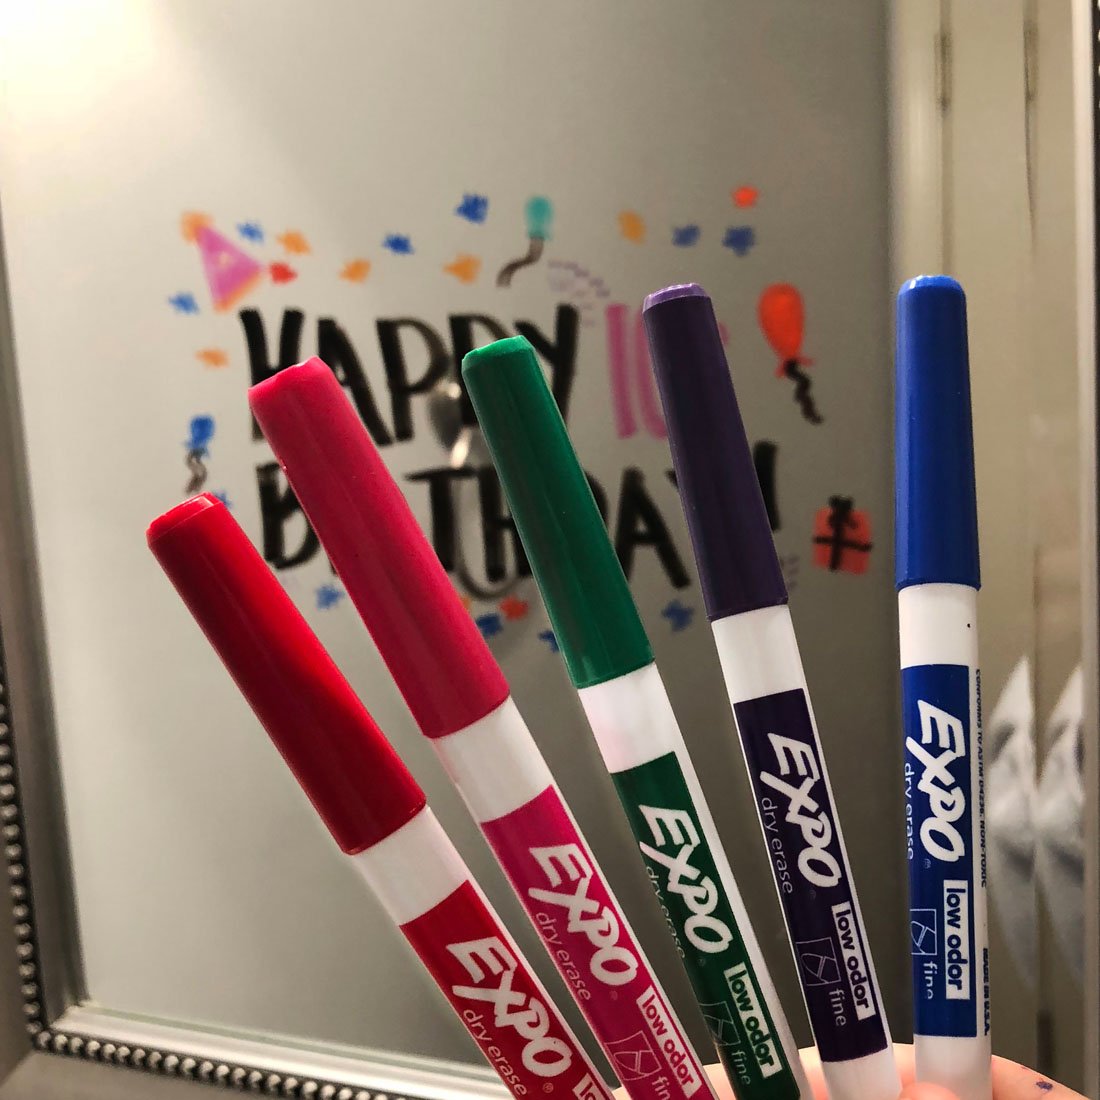 Create Motivational Mirror Notes With EXPO Marker